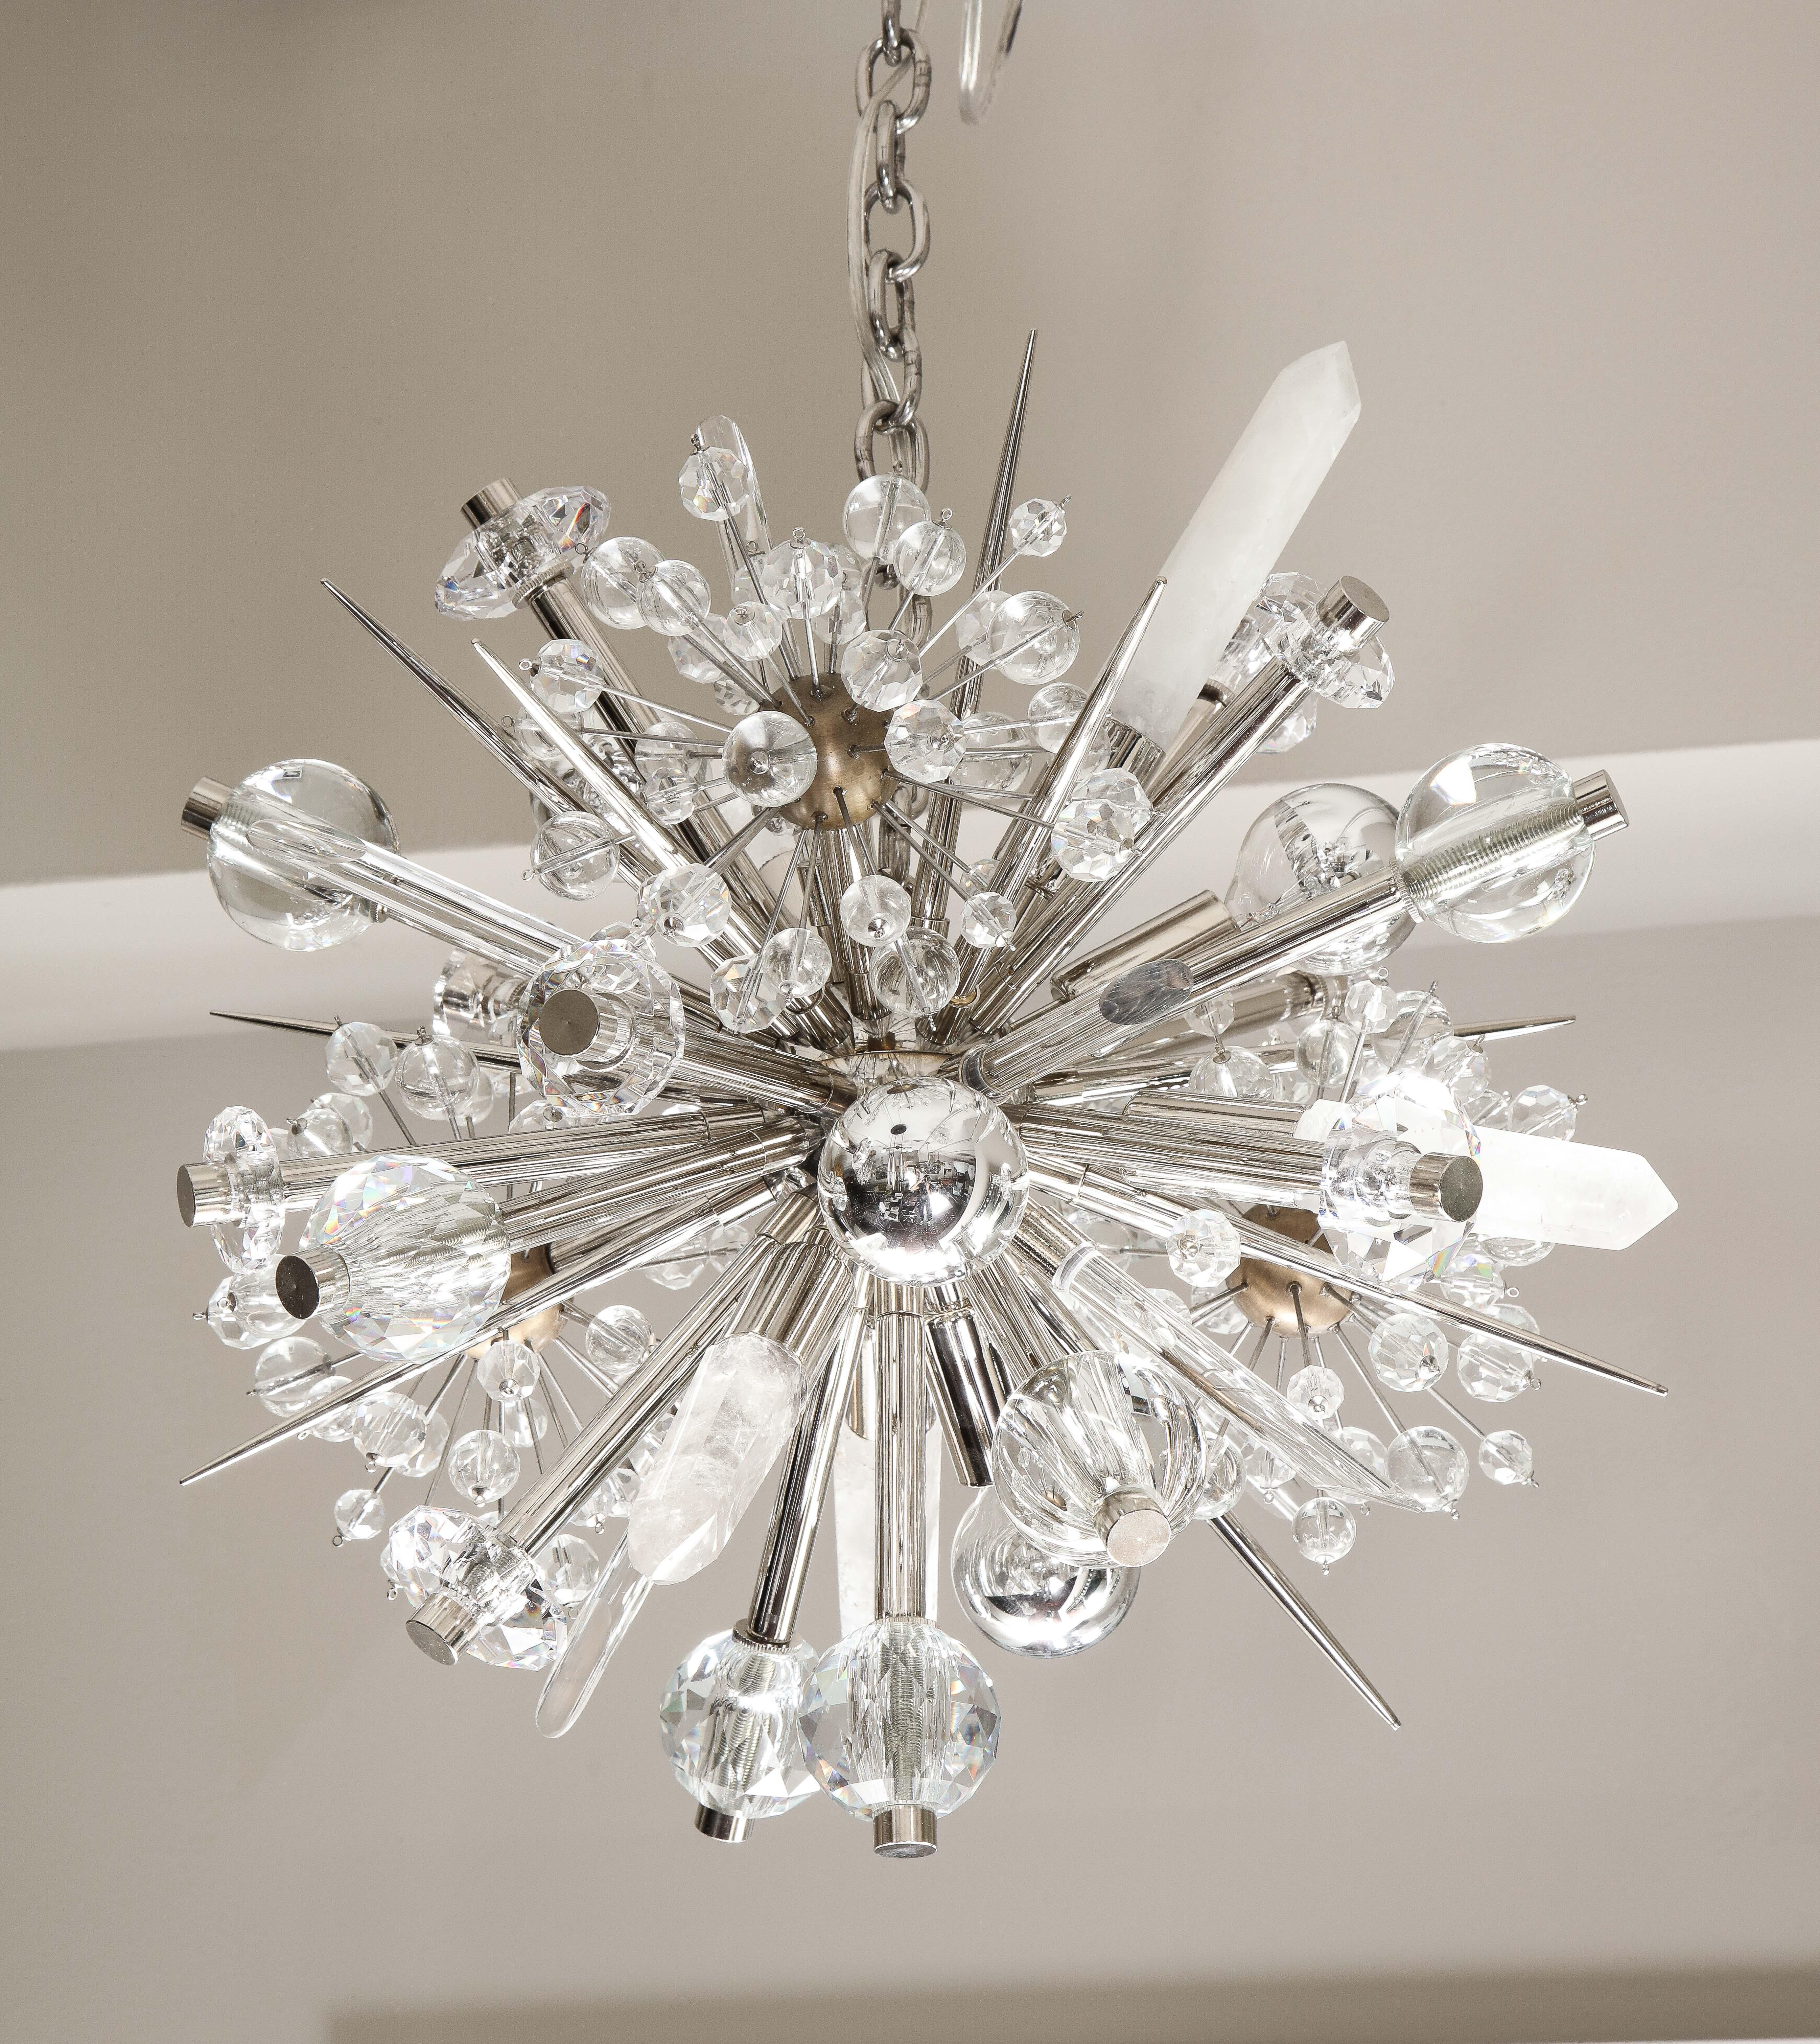 Custom petite Austrian crystal and rock crystal sputnik chandelier. This glamorous chandelier is fully customizable in sizes, finishes and design. As an example, you can choose faceted or smooth finish on crystals, and where you would like to have